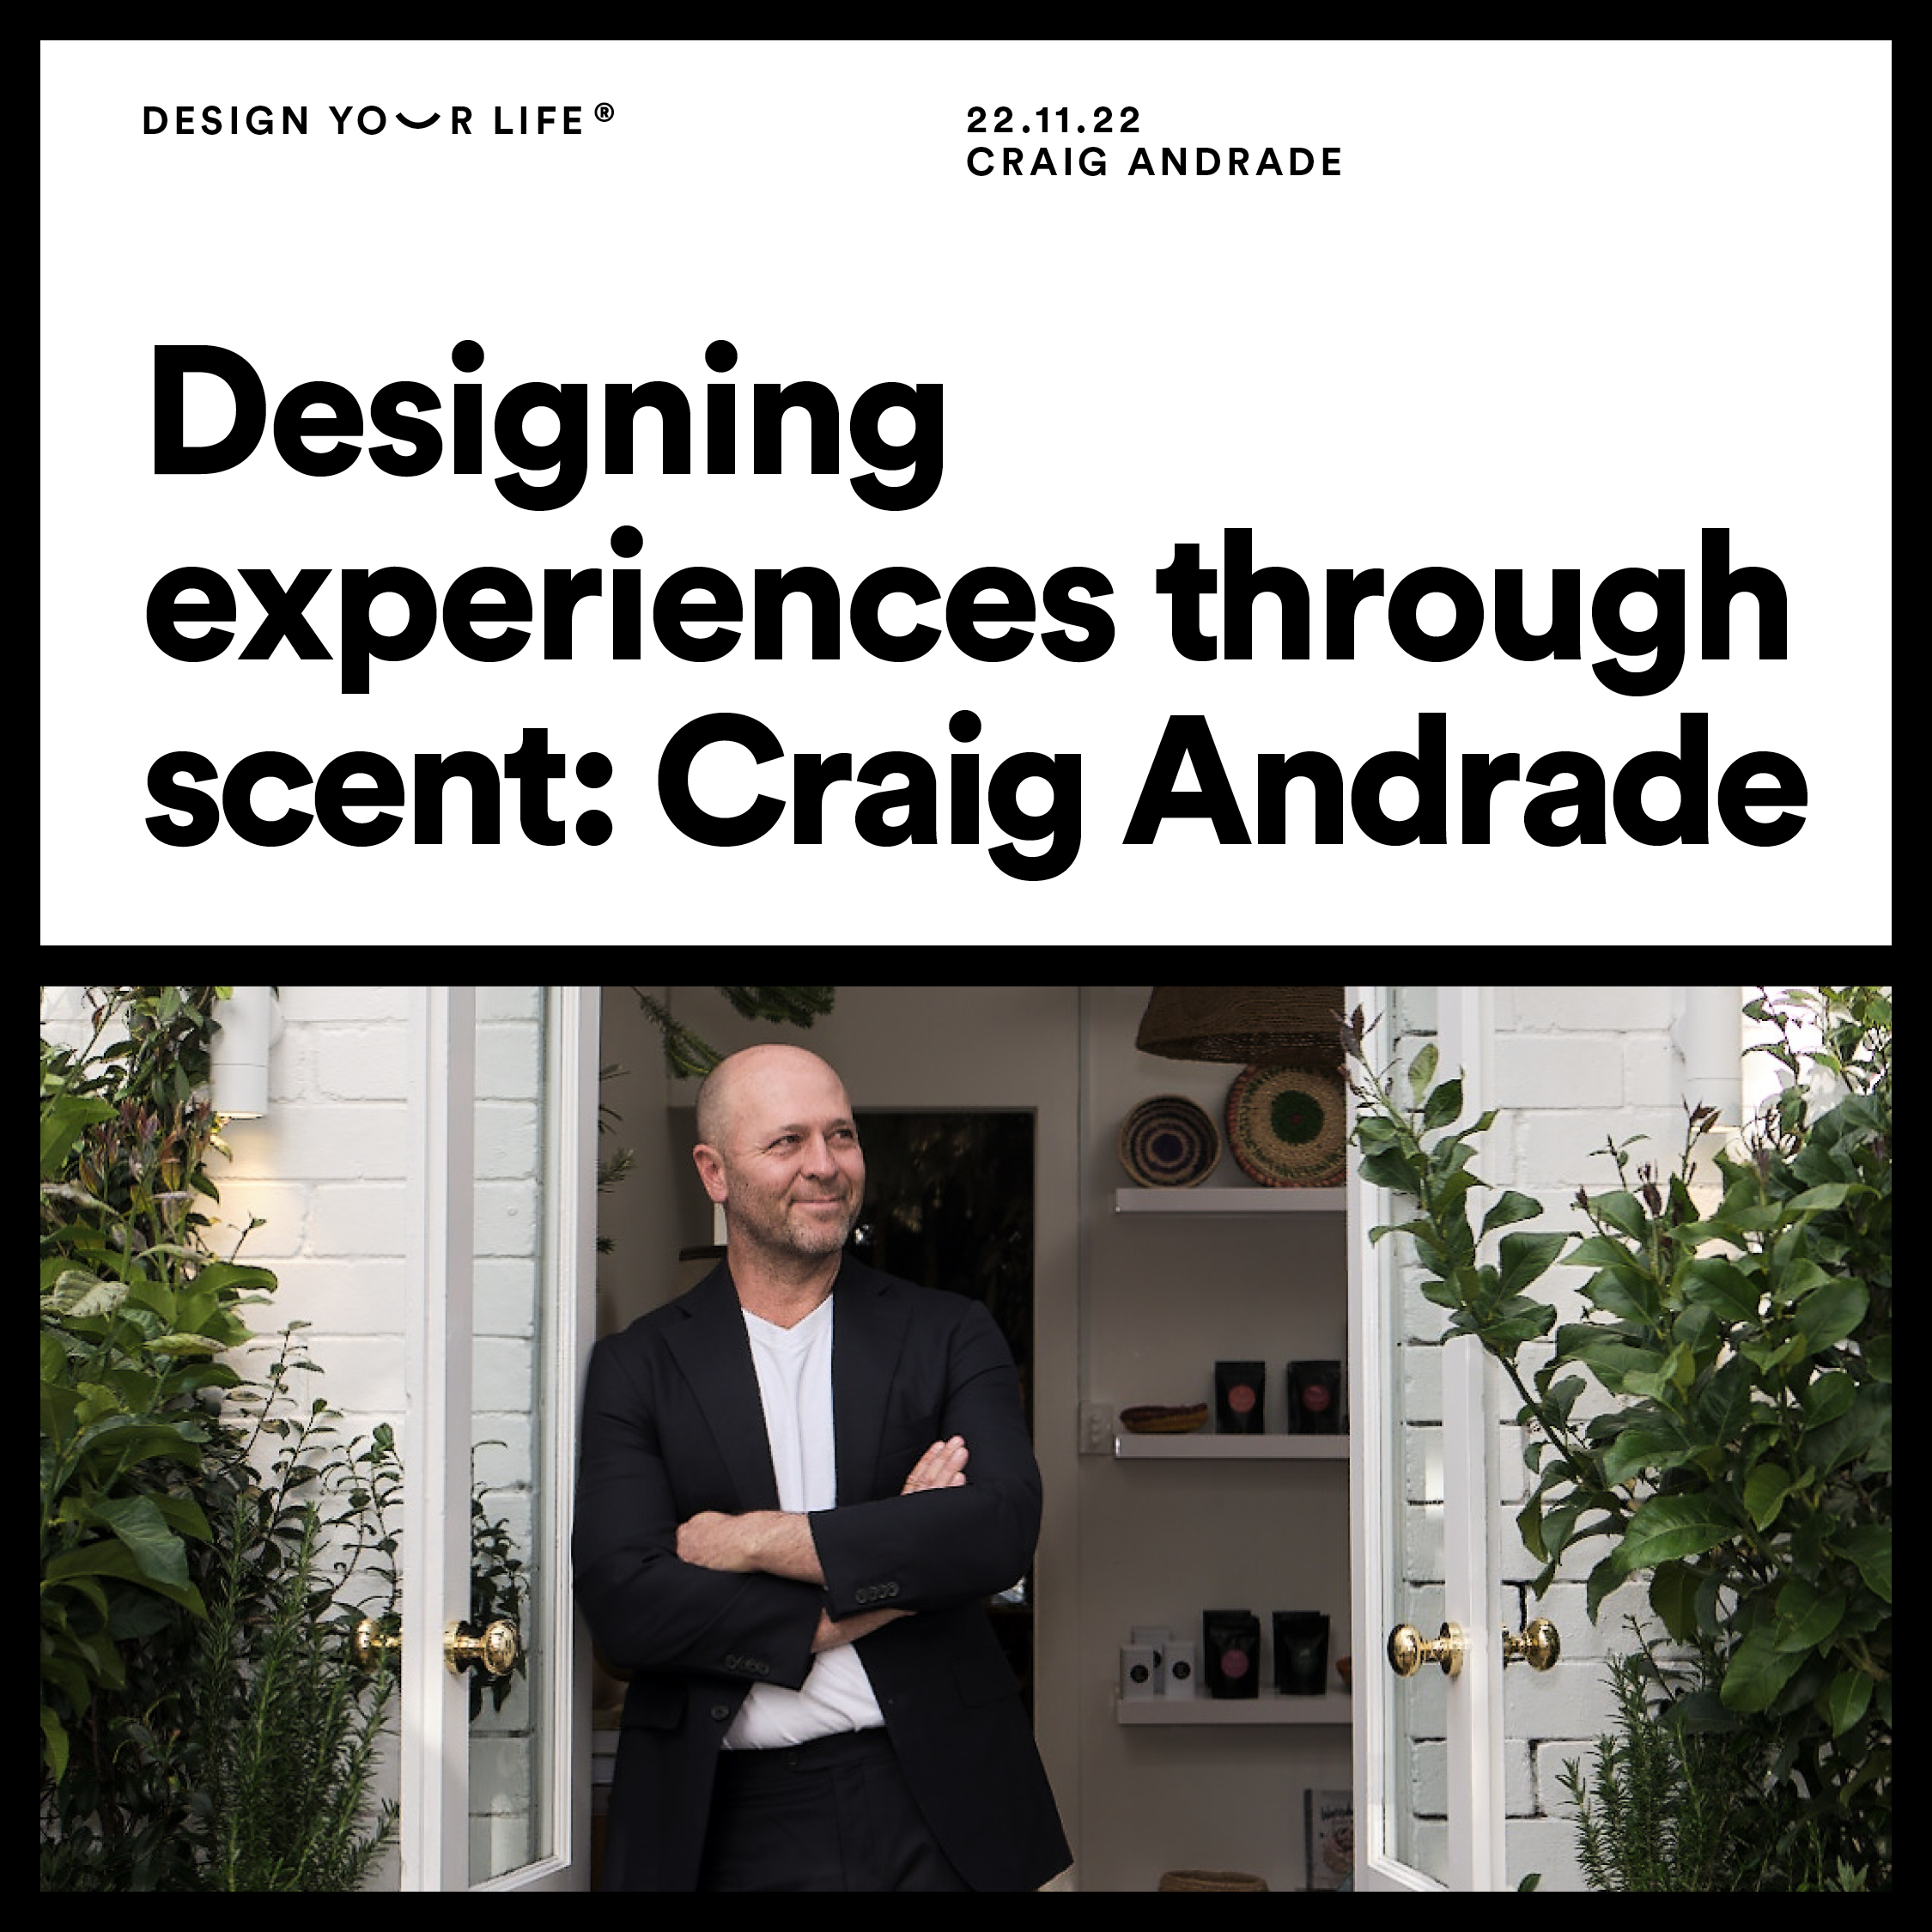 Designing experiences through scent with Craig Andrade